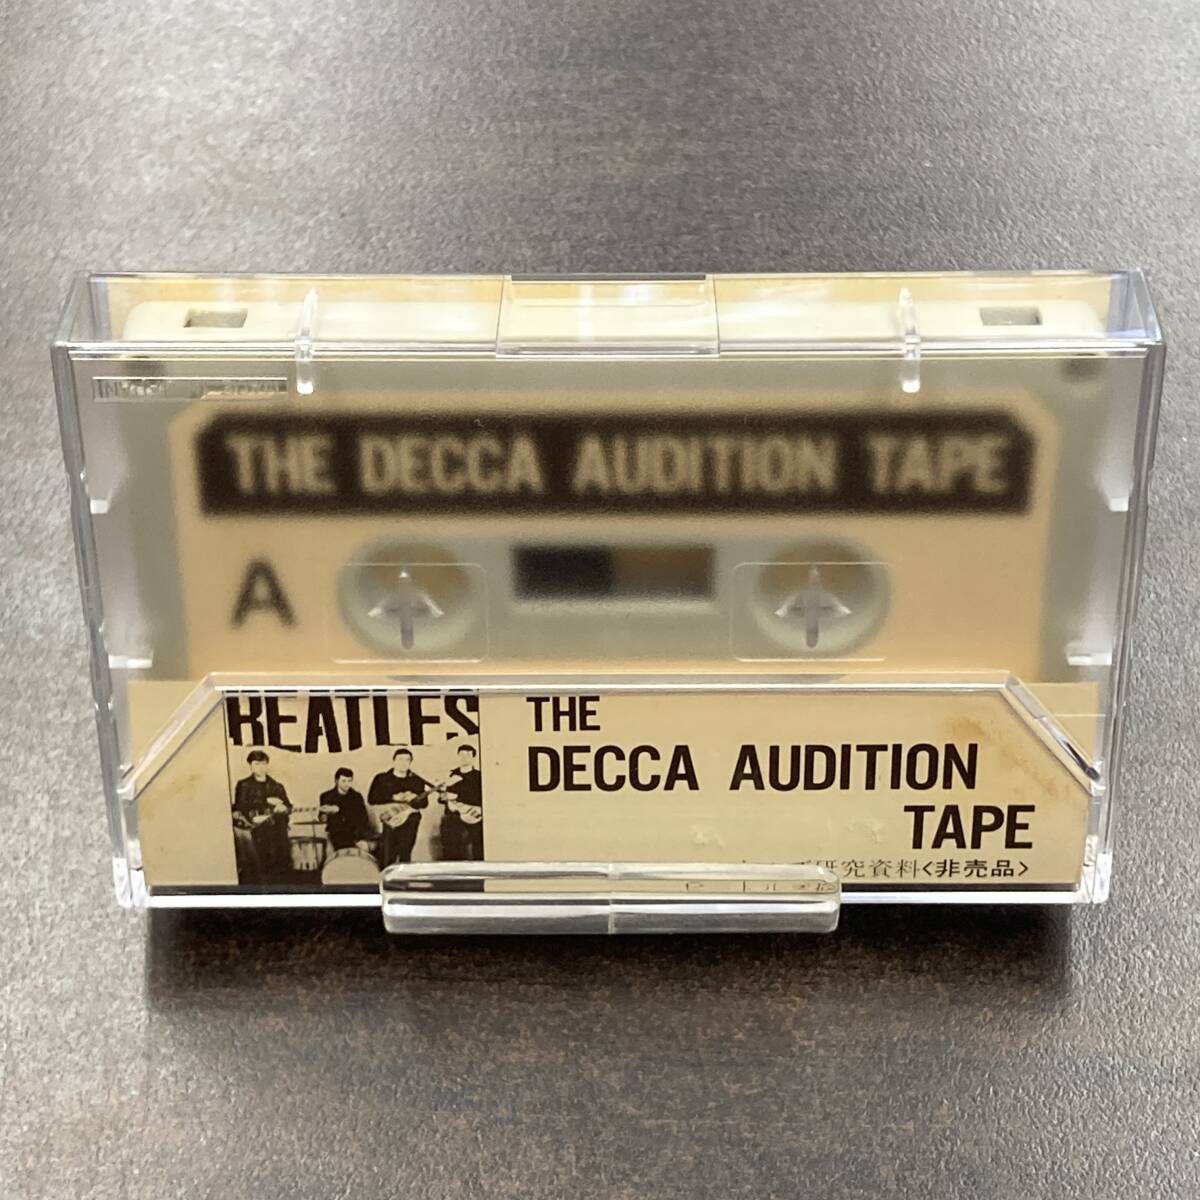 1226Mw ザ・ビートルズ 研究資料 THE DECCA AUDITION TAPE カセットテープ / THE BEATLES Research materials Cassette Tapeの画像5